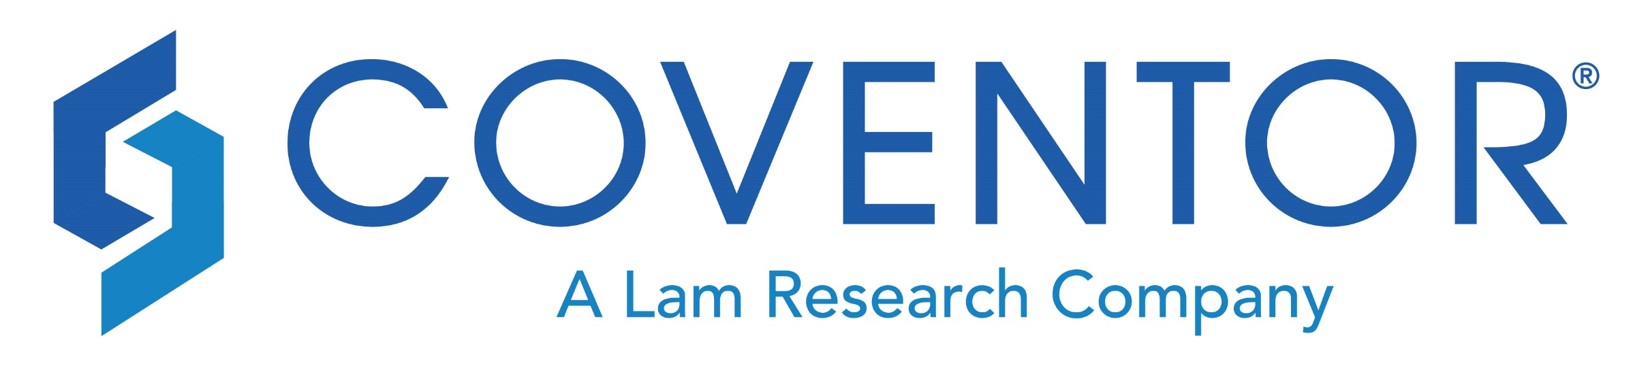 Coventor A Lam Research Company logo